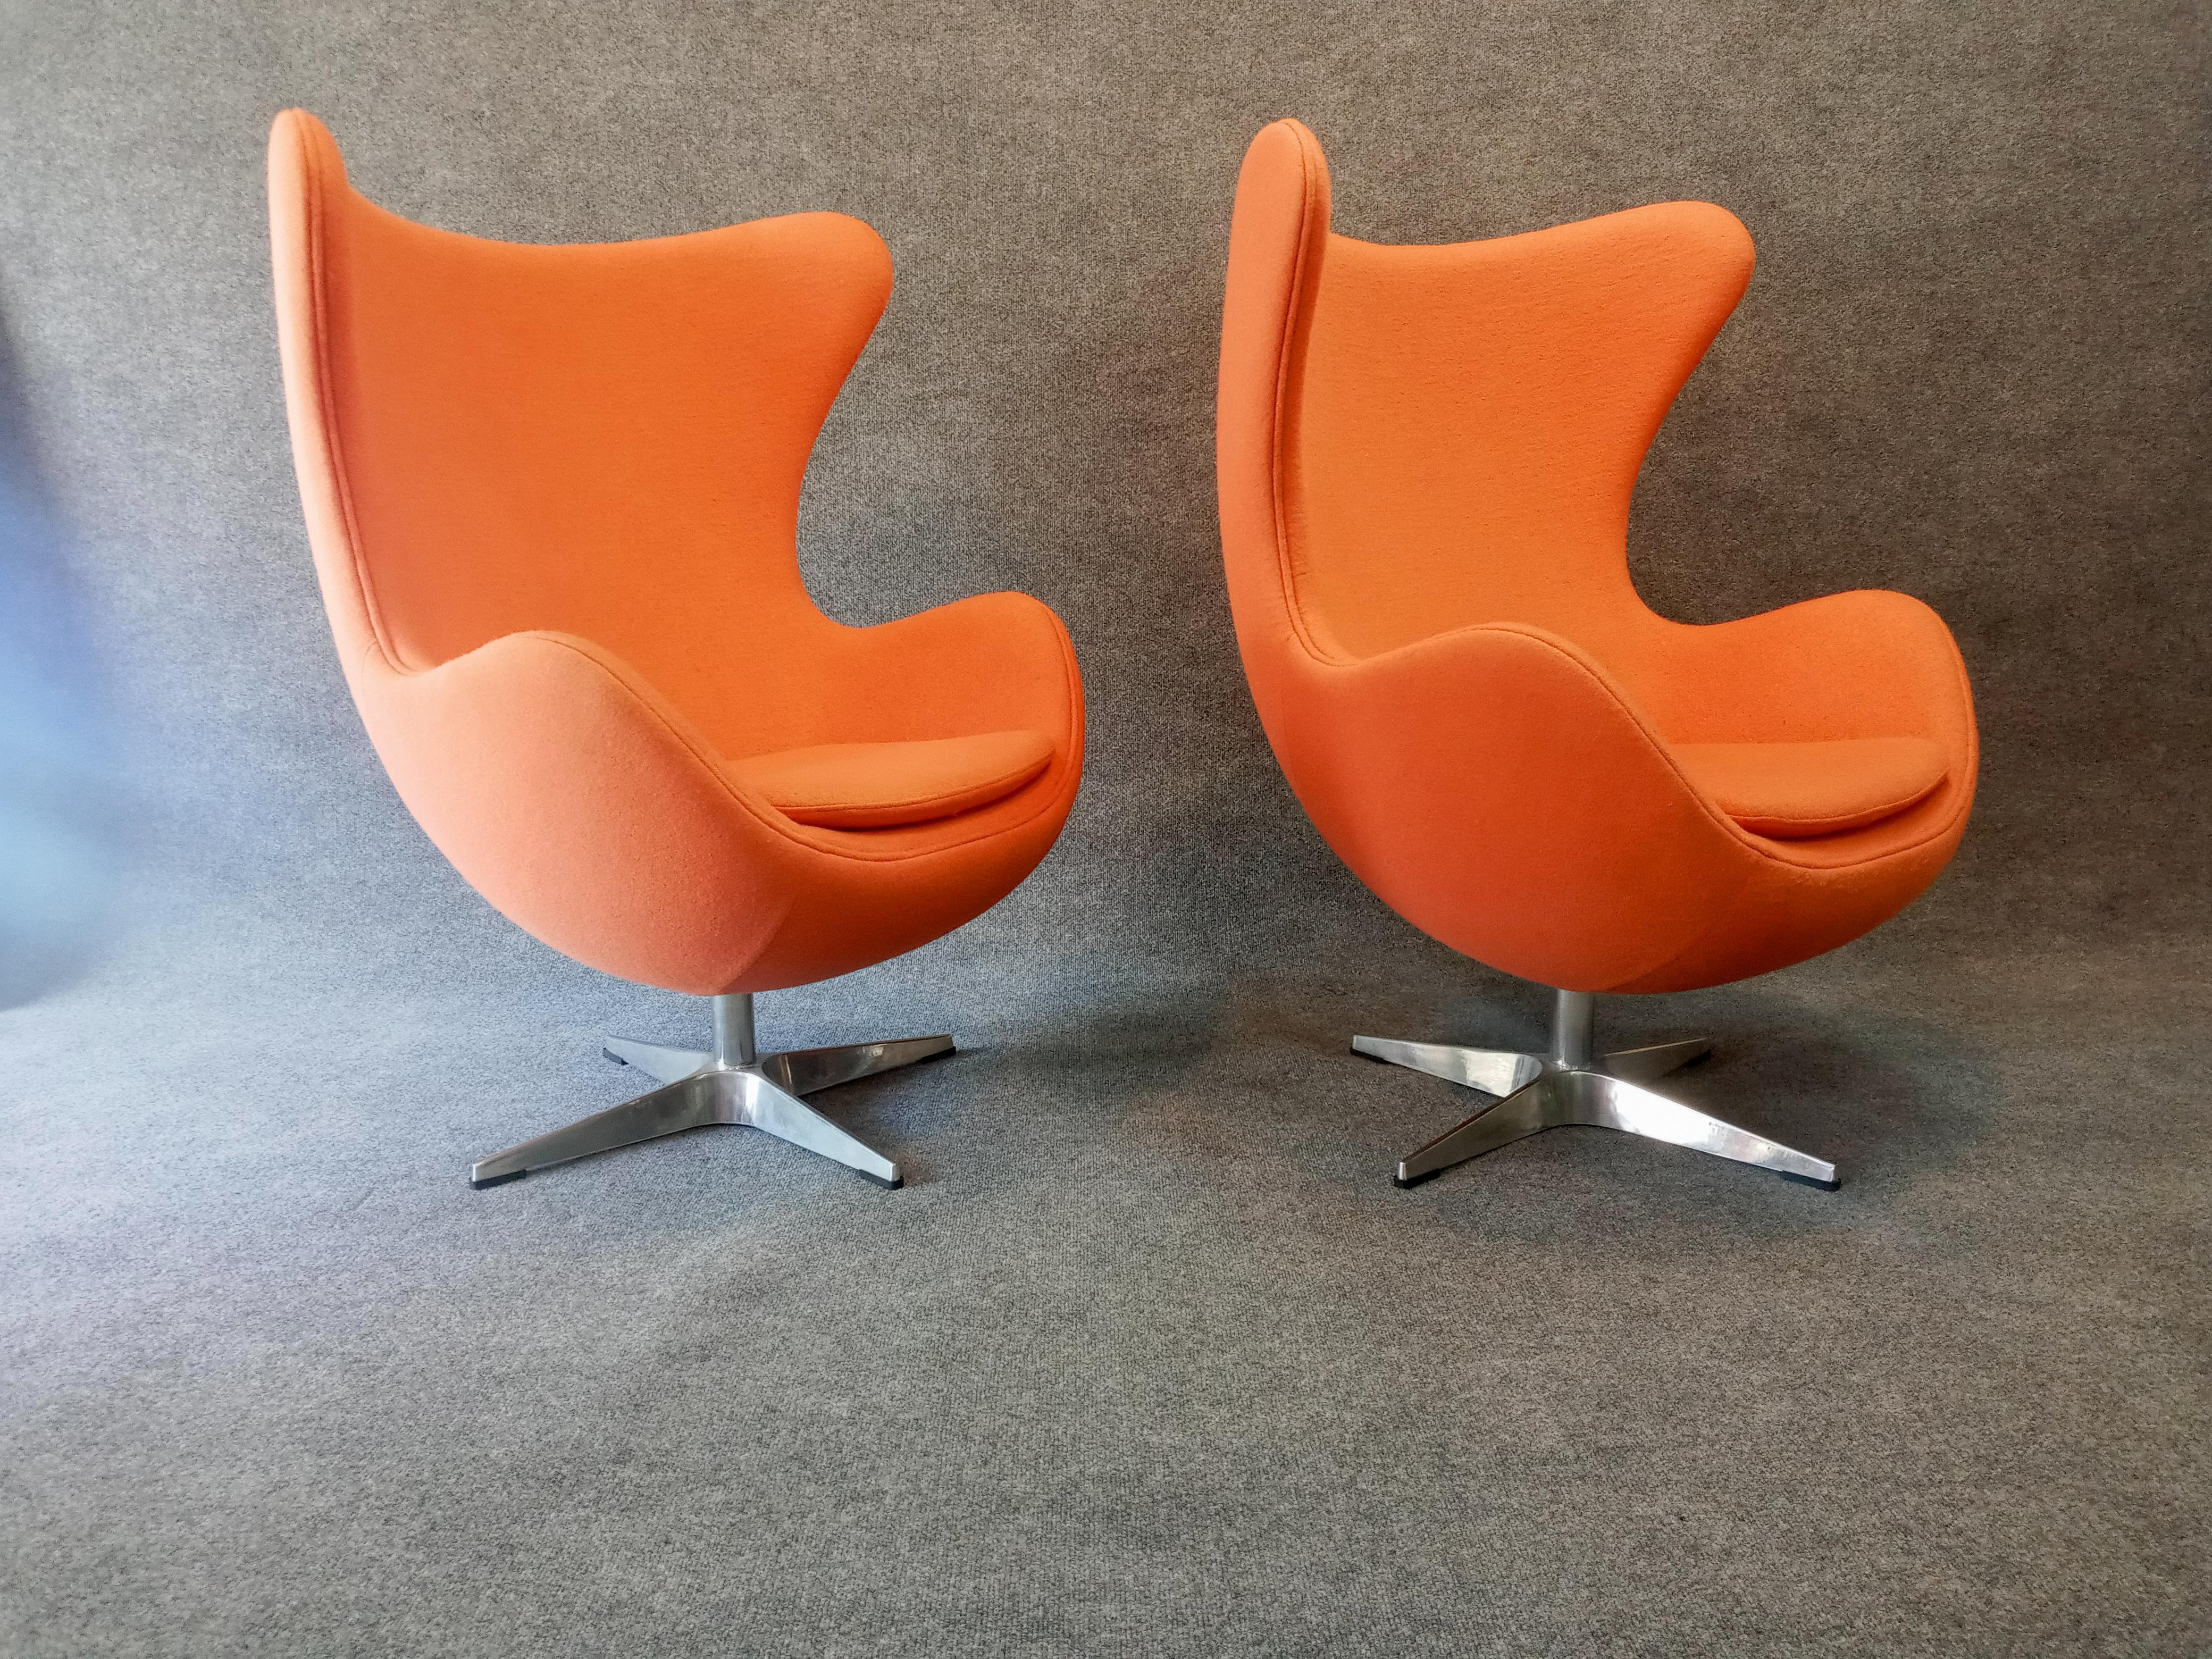 1960s styling paired with contemporary manufacturing quality and condition, this bright orange chairs are very comfortable with the tilt and swivel feature. In textured fabric with bright metal bases, chairs are clean, present well and highly